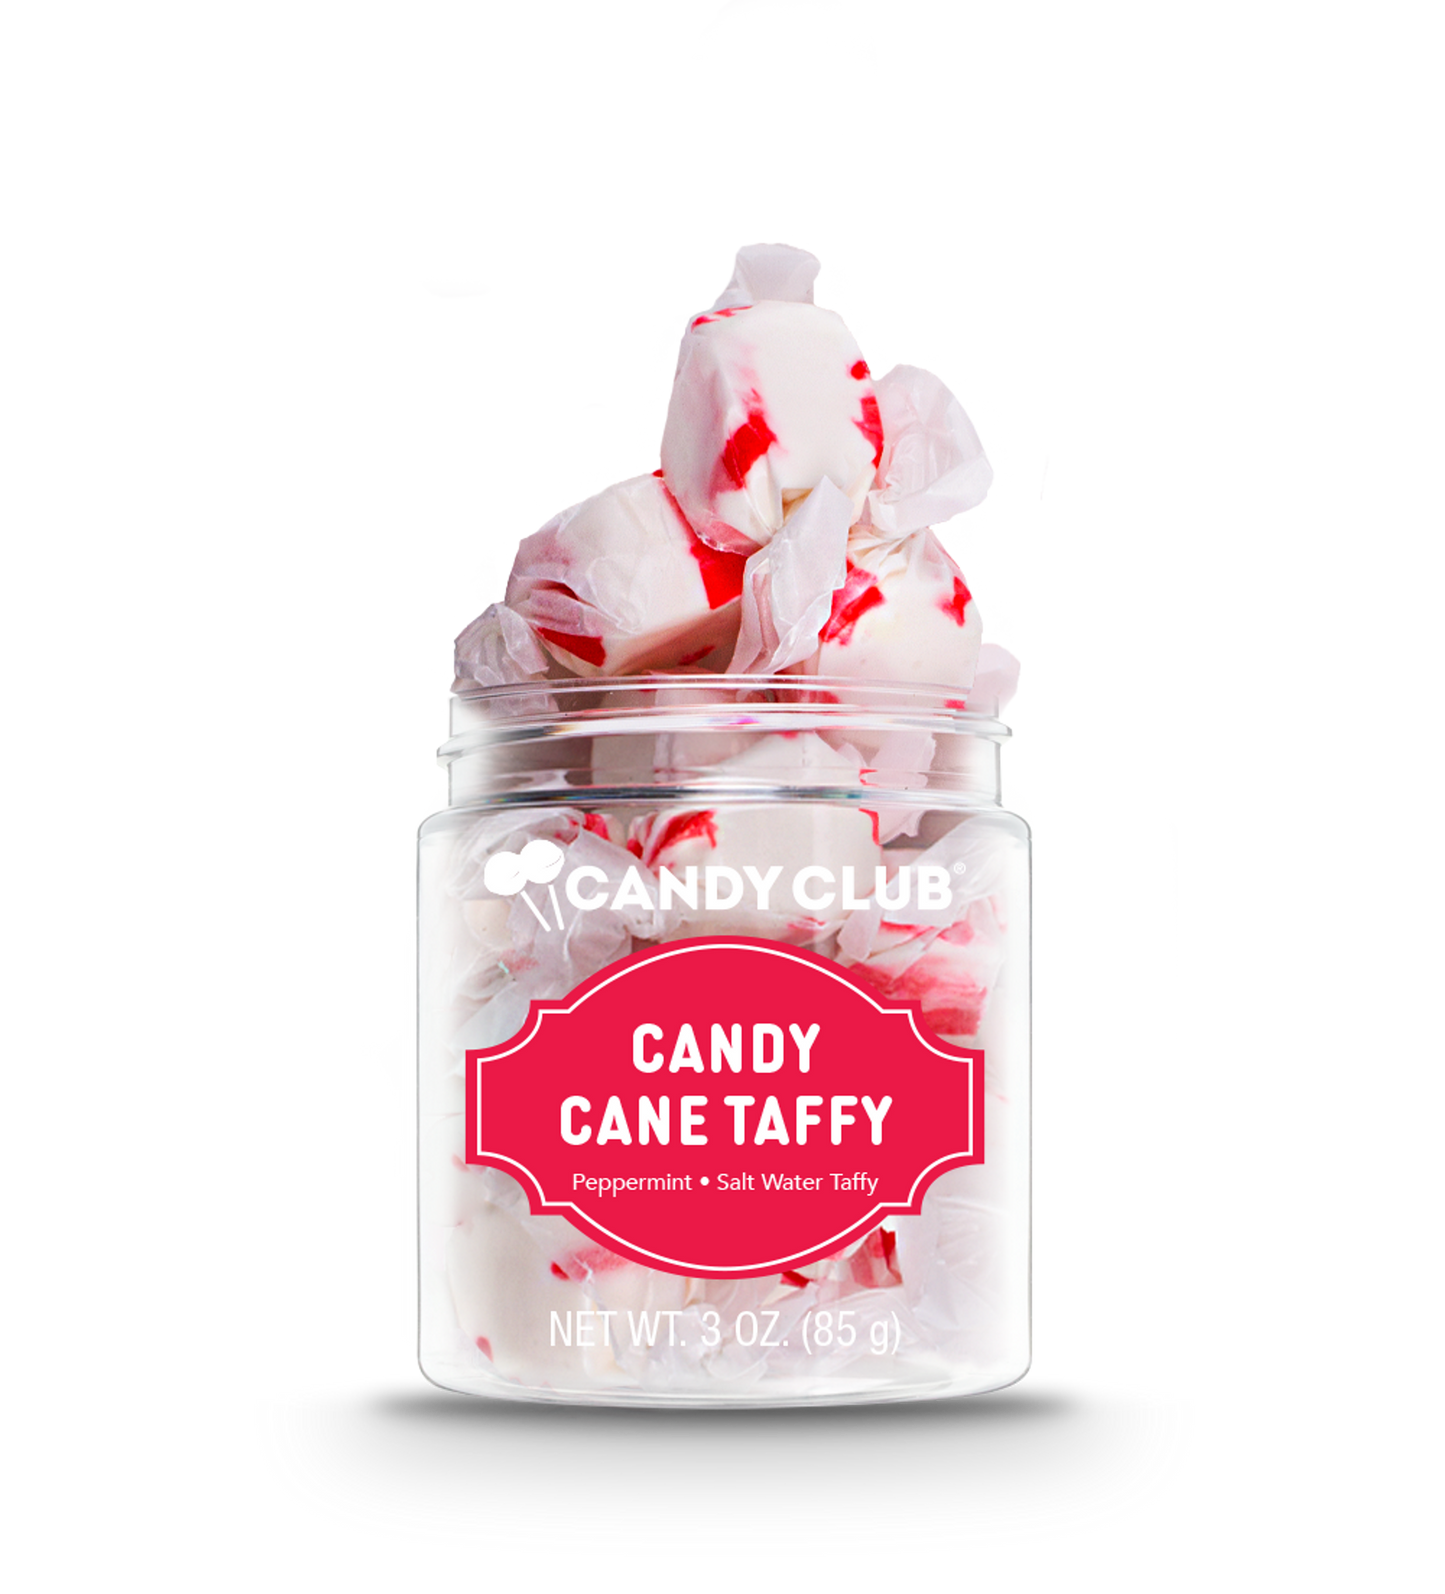 Candy Cane Taffy - retail swag candy